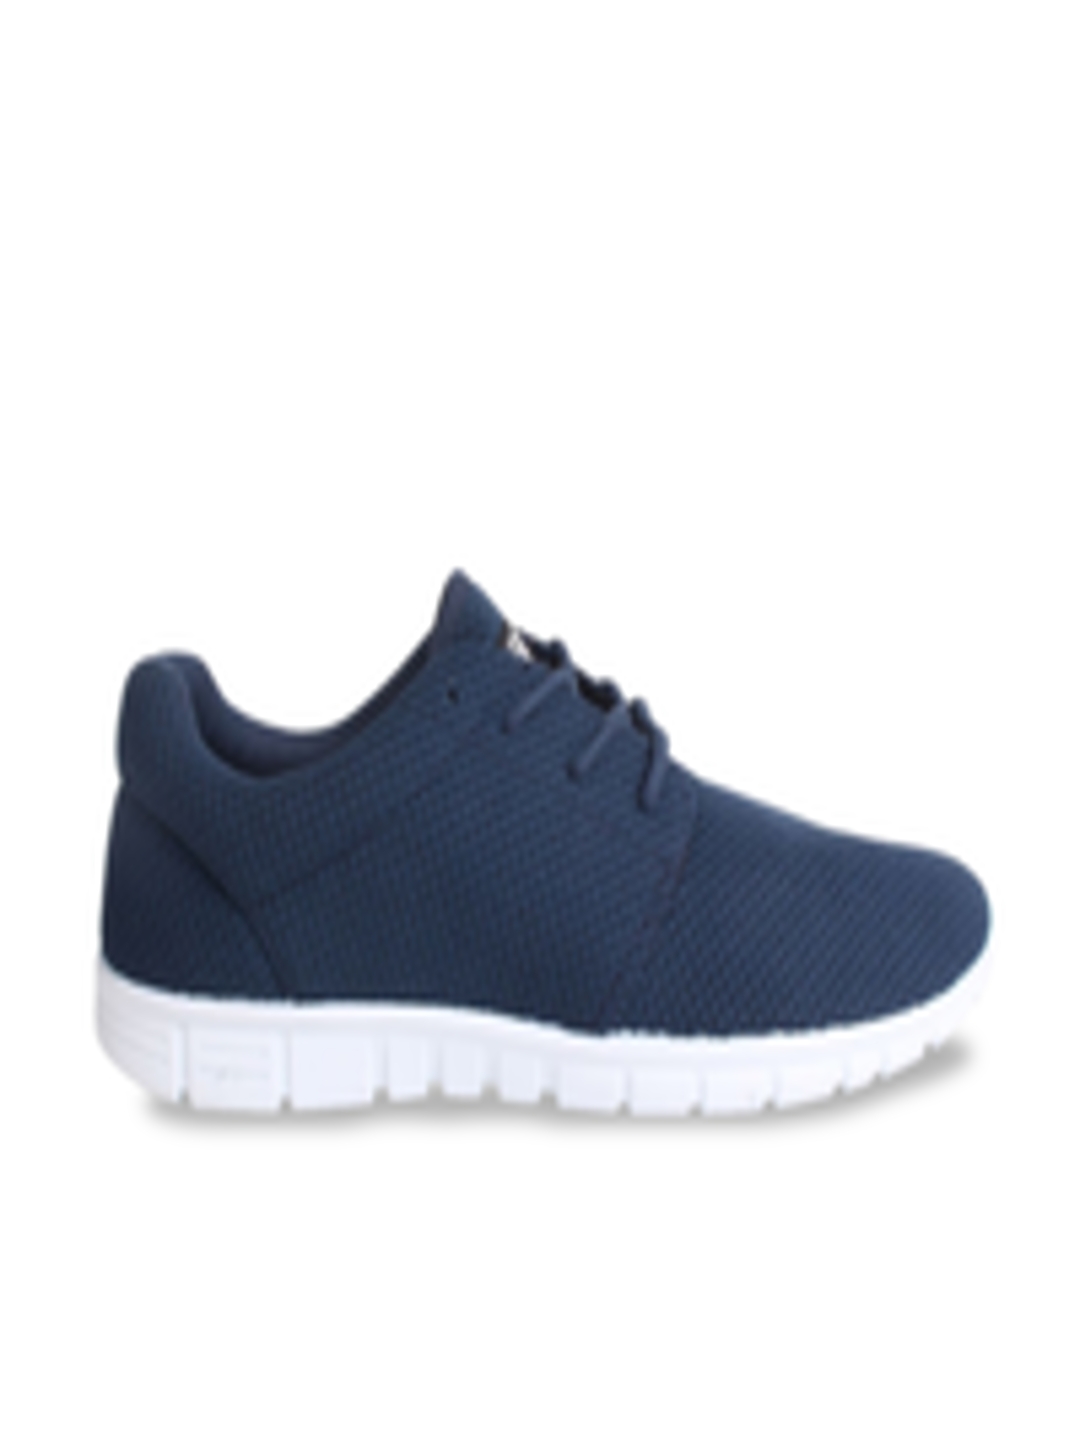 Buy FABRIC Men Navy Blue Textile Running Shoes - Sports Shoes for Men ...